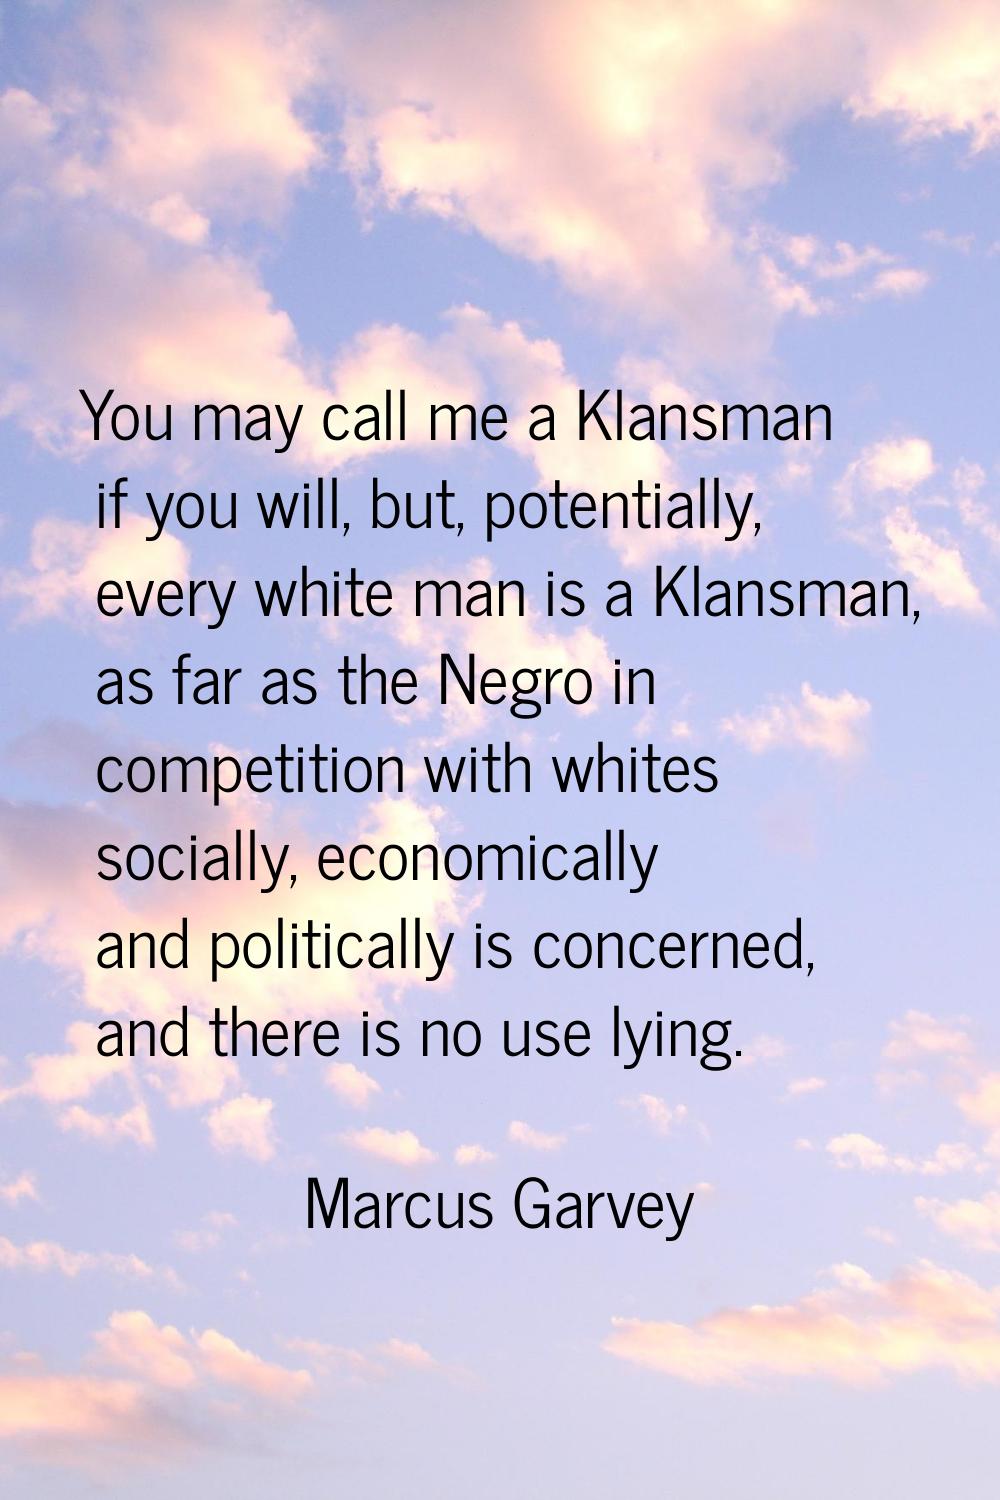 You may call me a Klansman if you will, but, potentially, every white man is a Klansman, as far as 